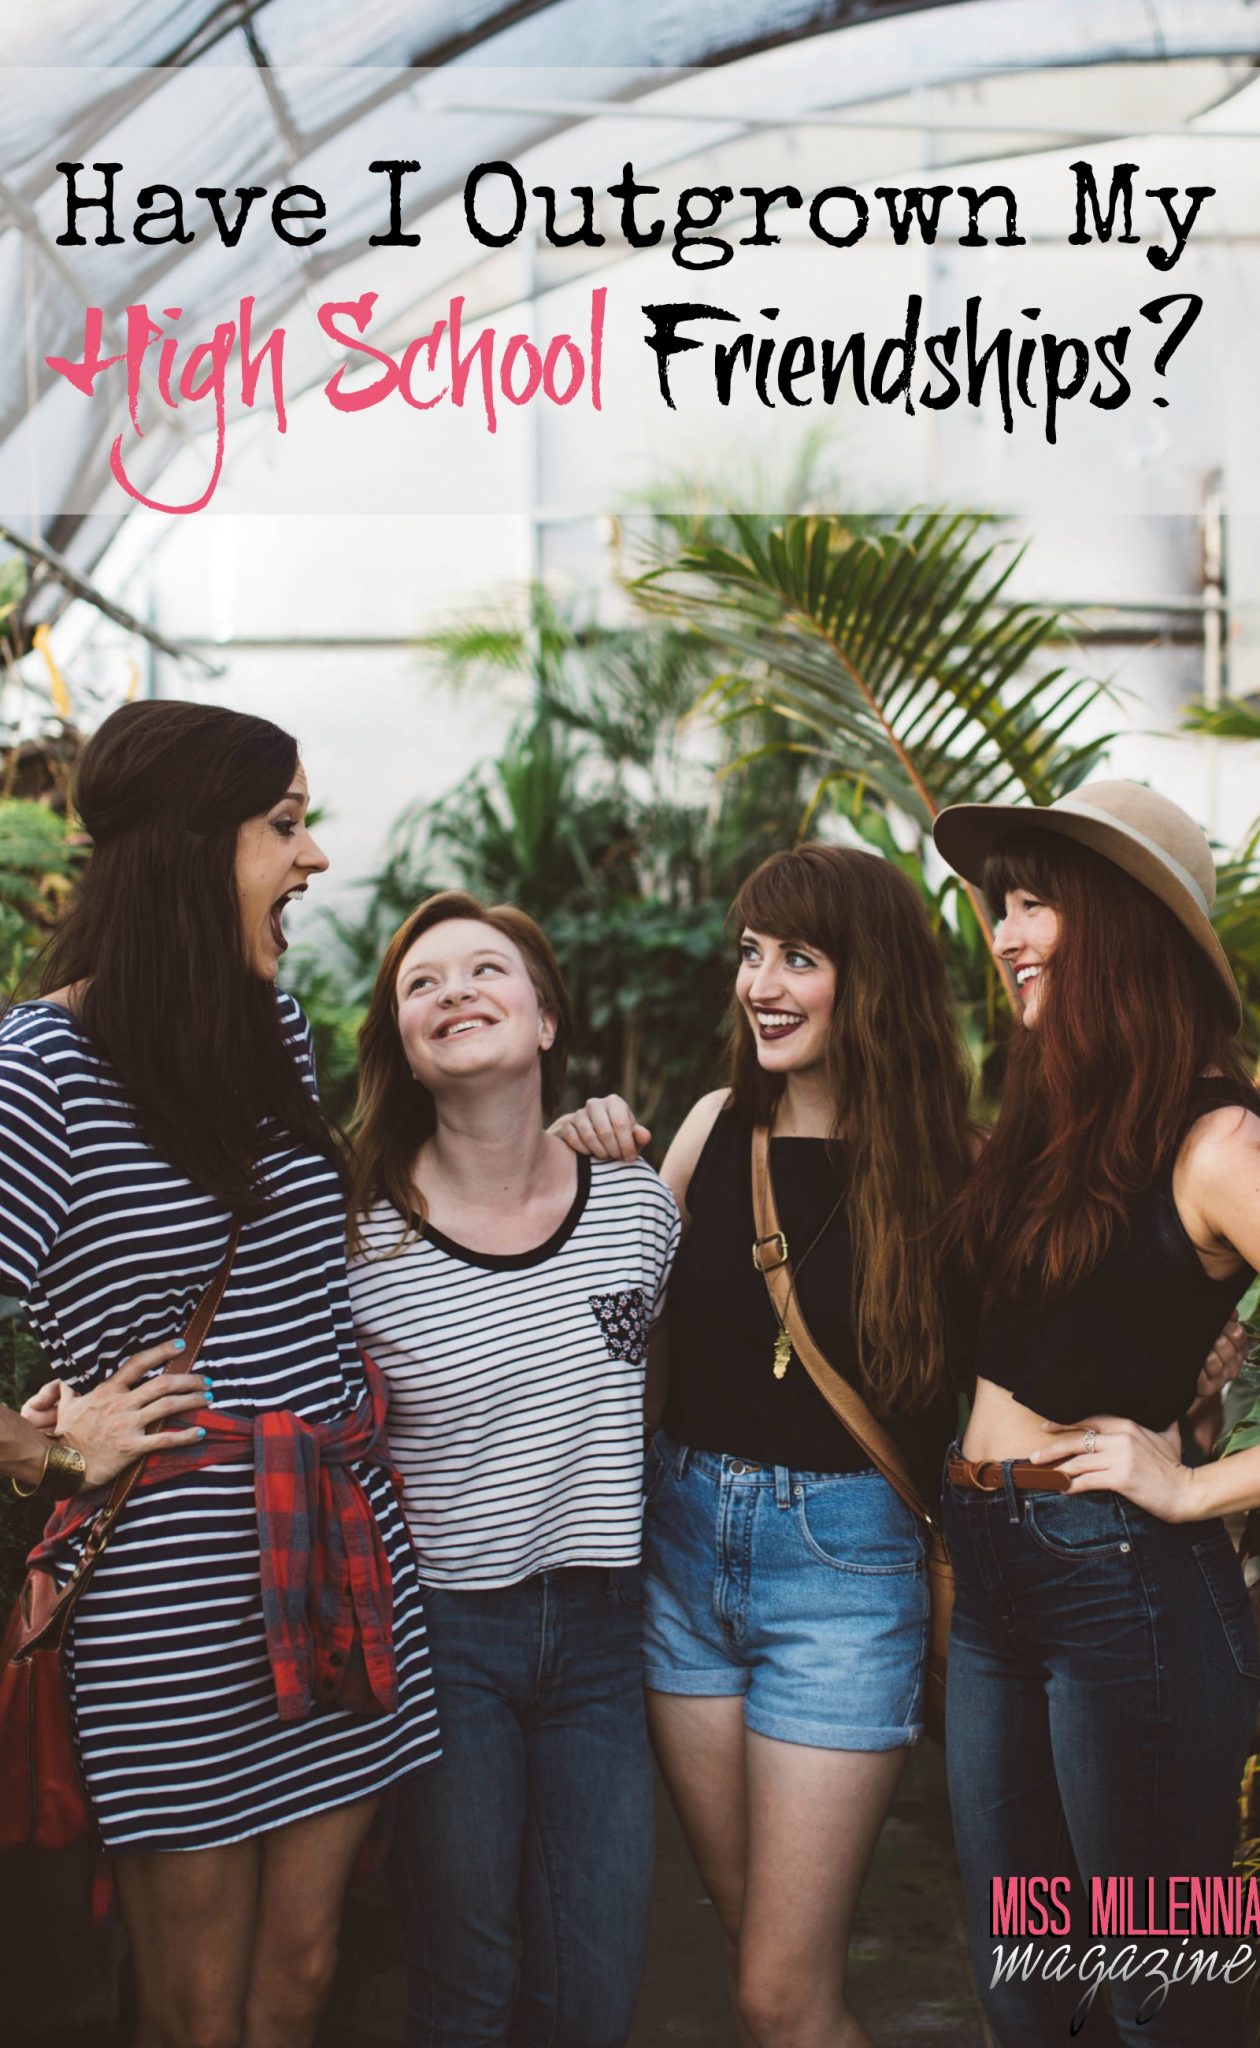 Have I Outgrown My High School Friendships?